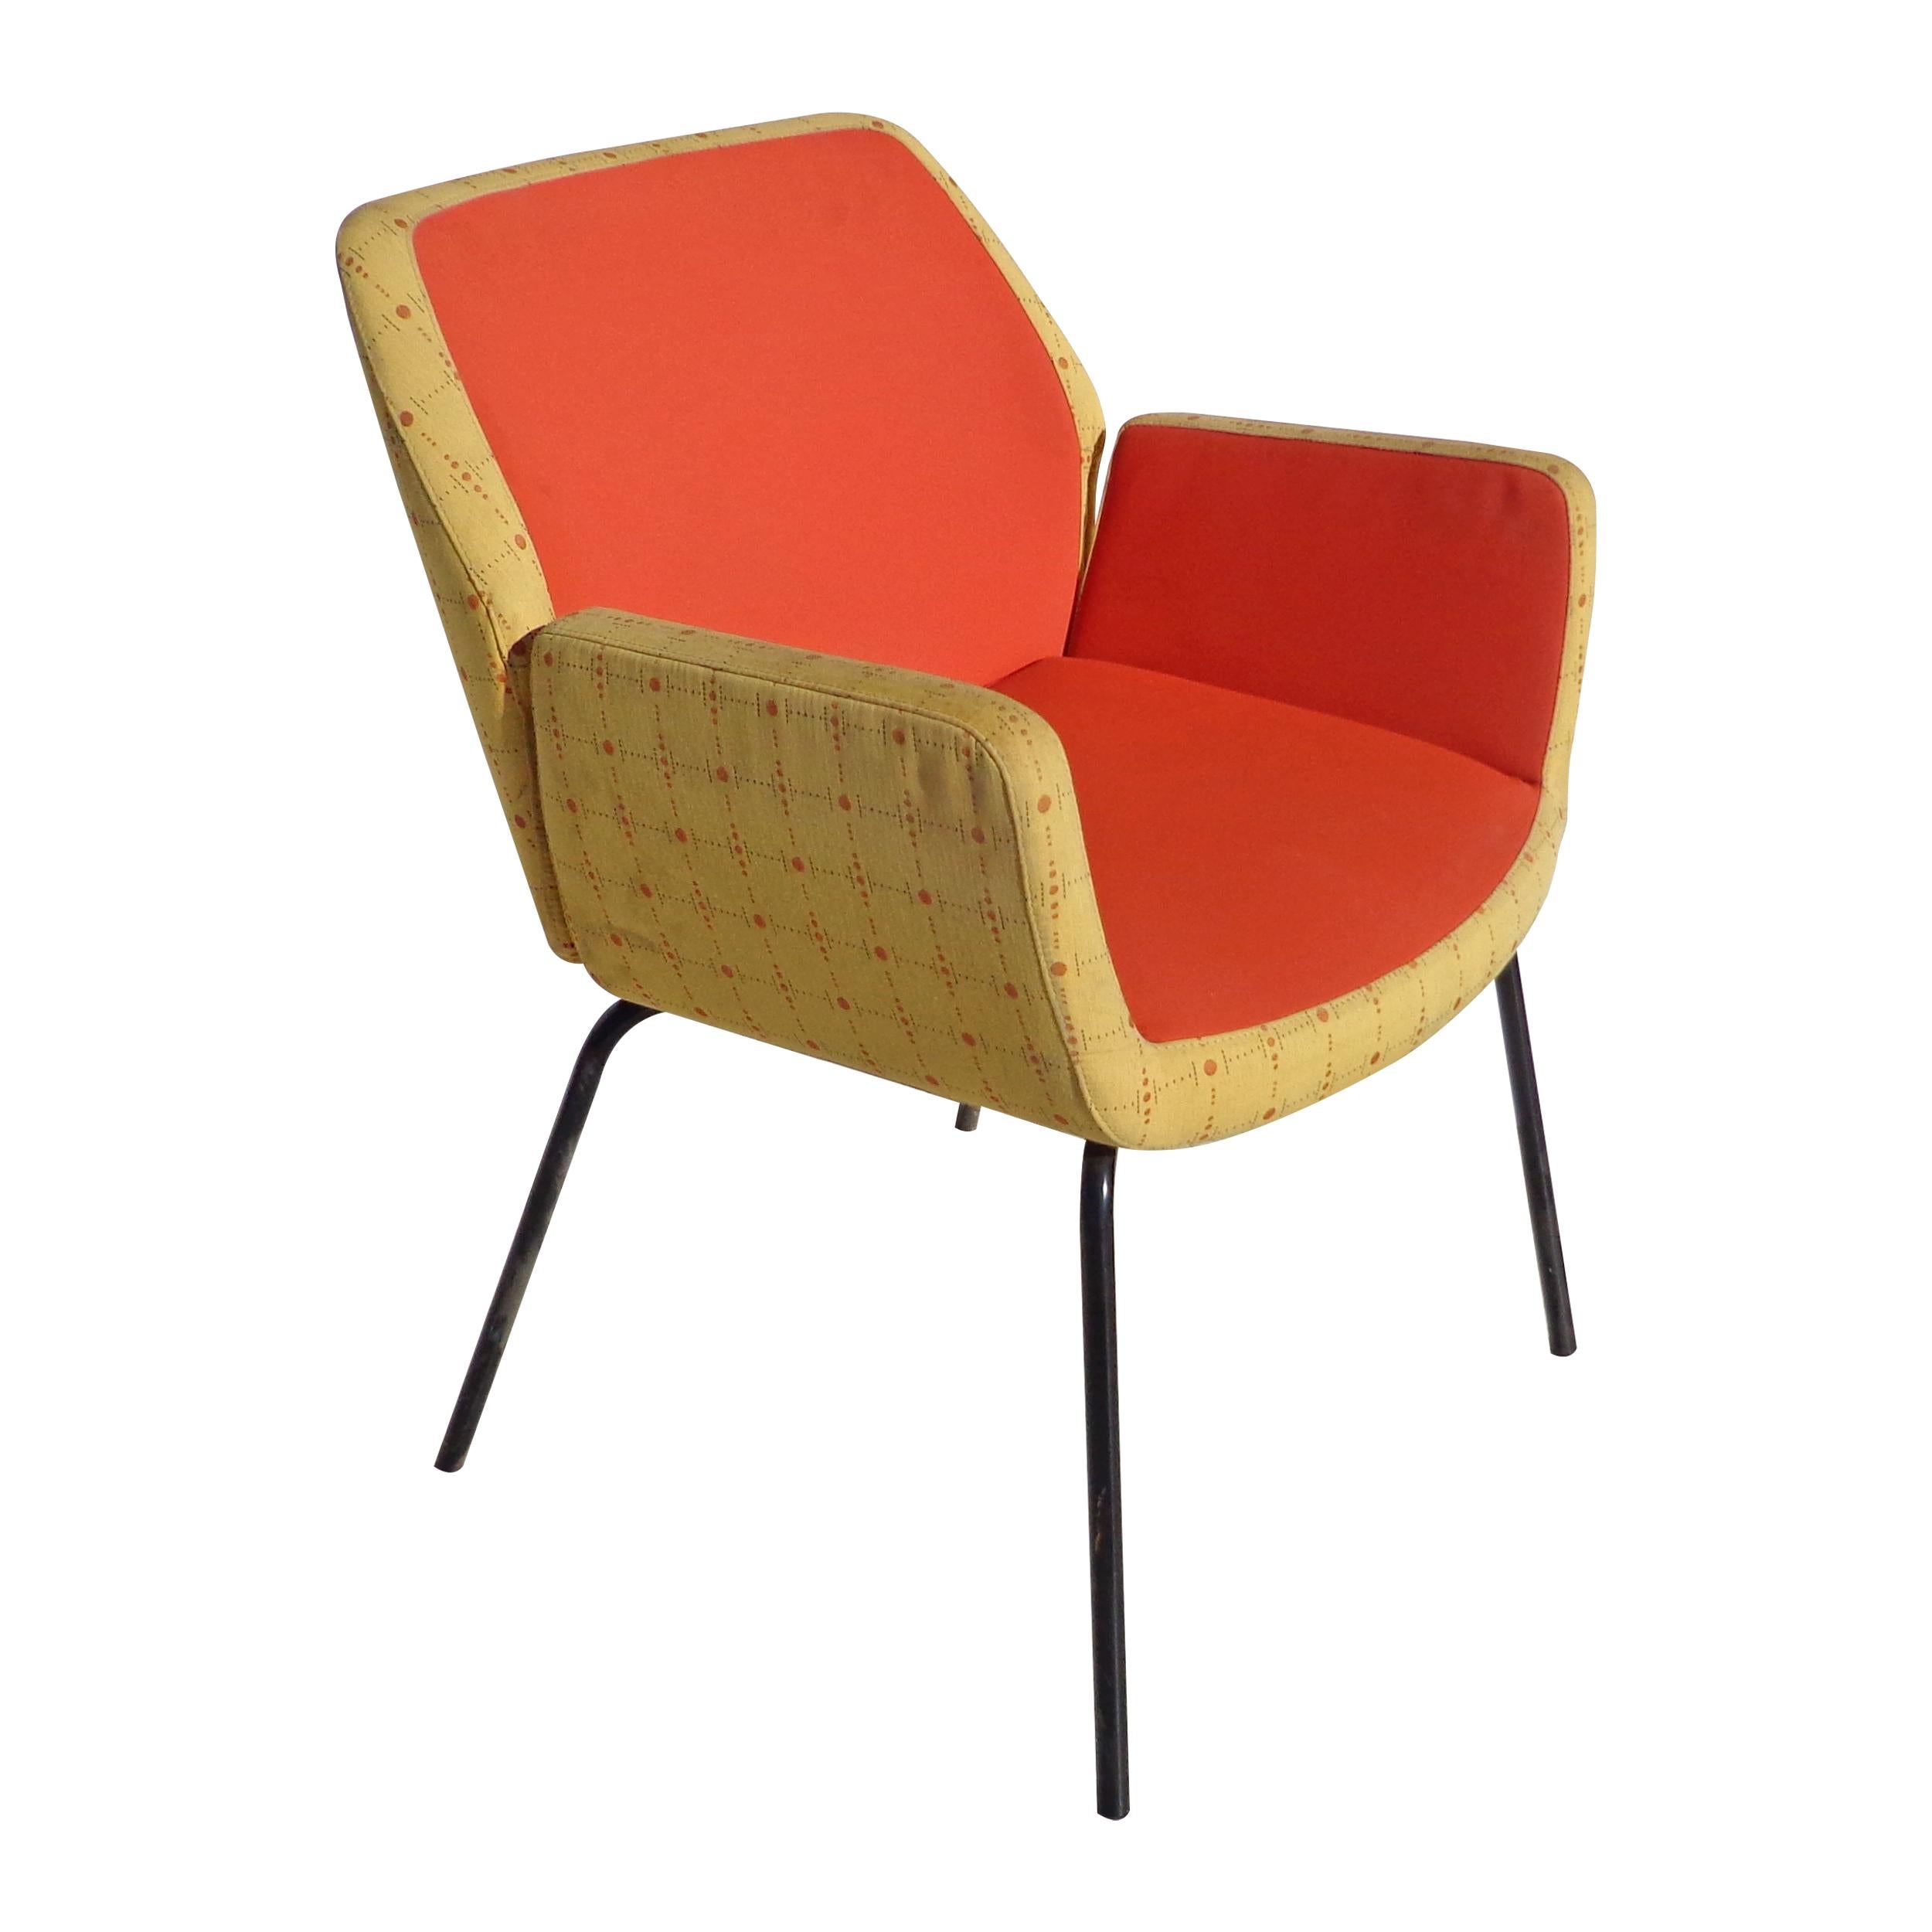 Bindu chair designed by award-winning designer Brian Kane for Coalesse. A modern chair which combines comfort and performance with clean lines and Minimalist design. Upholstered in the original mid mod 2 tone upholstery with powder coated